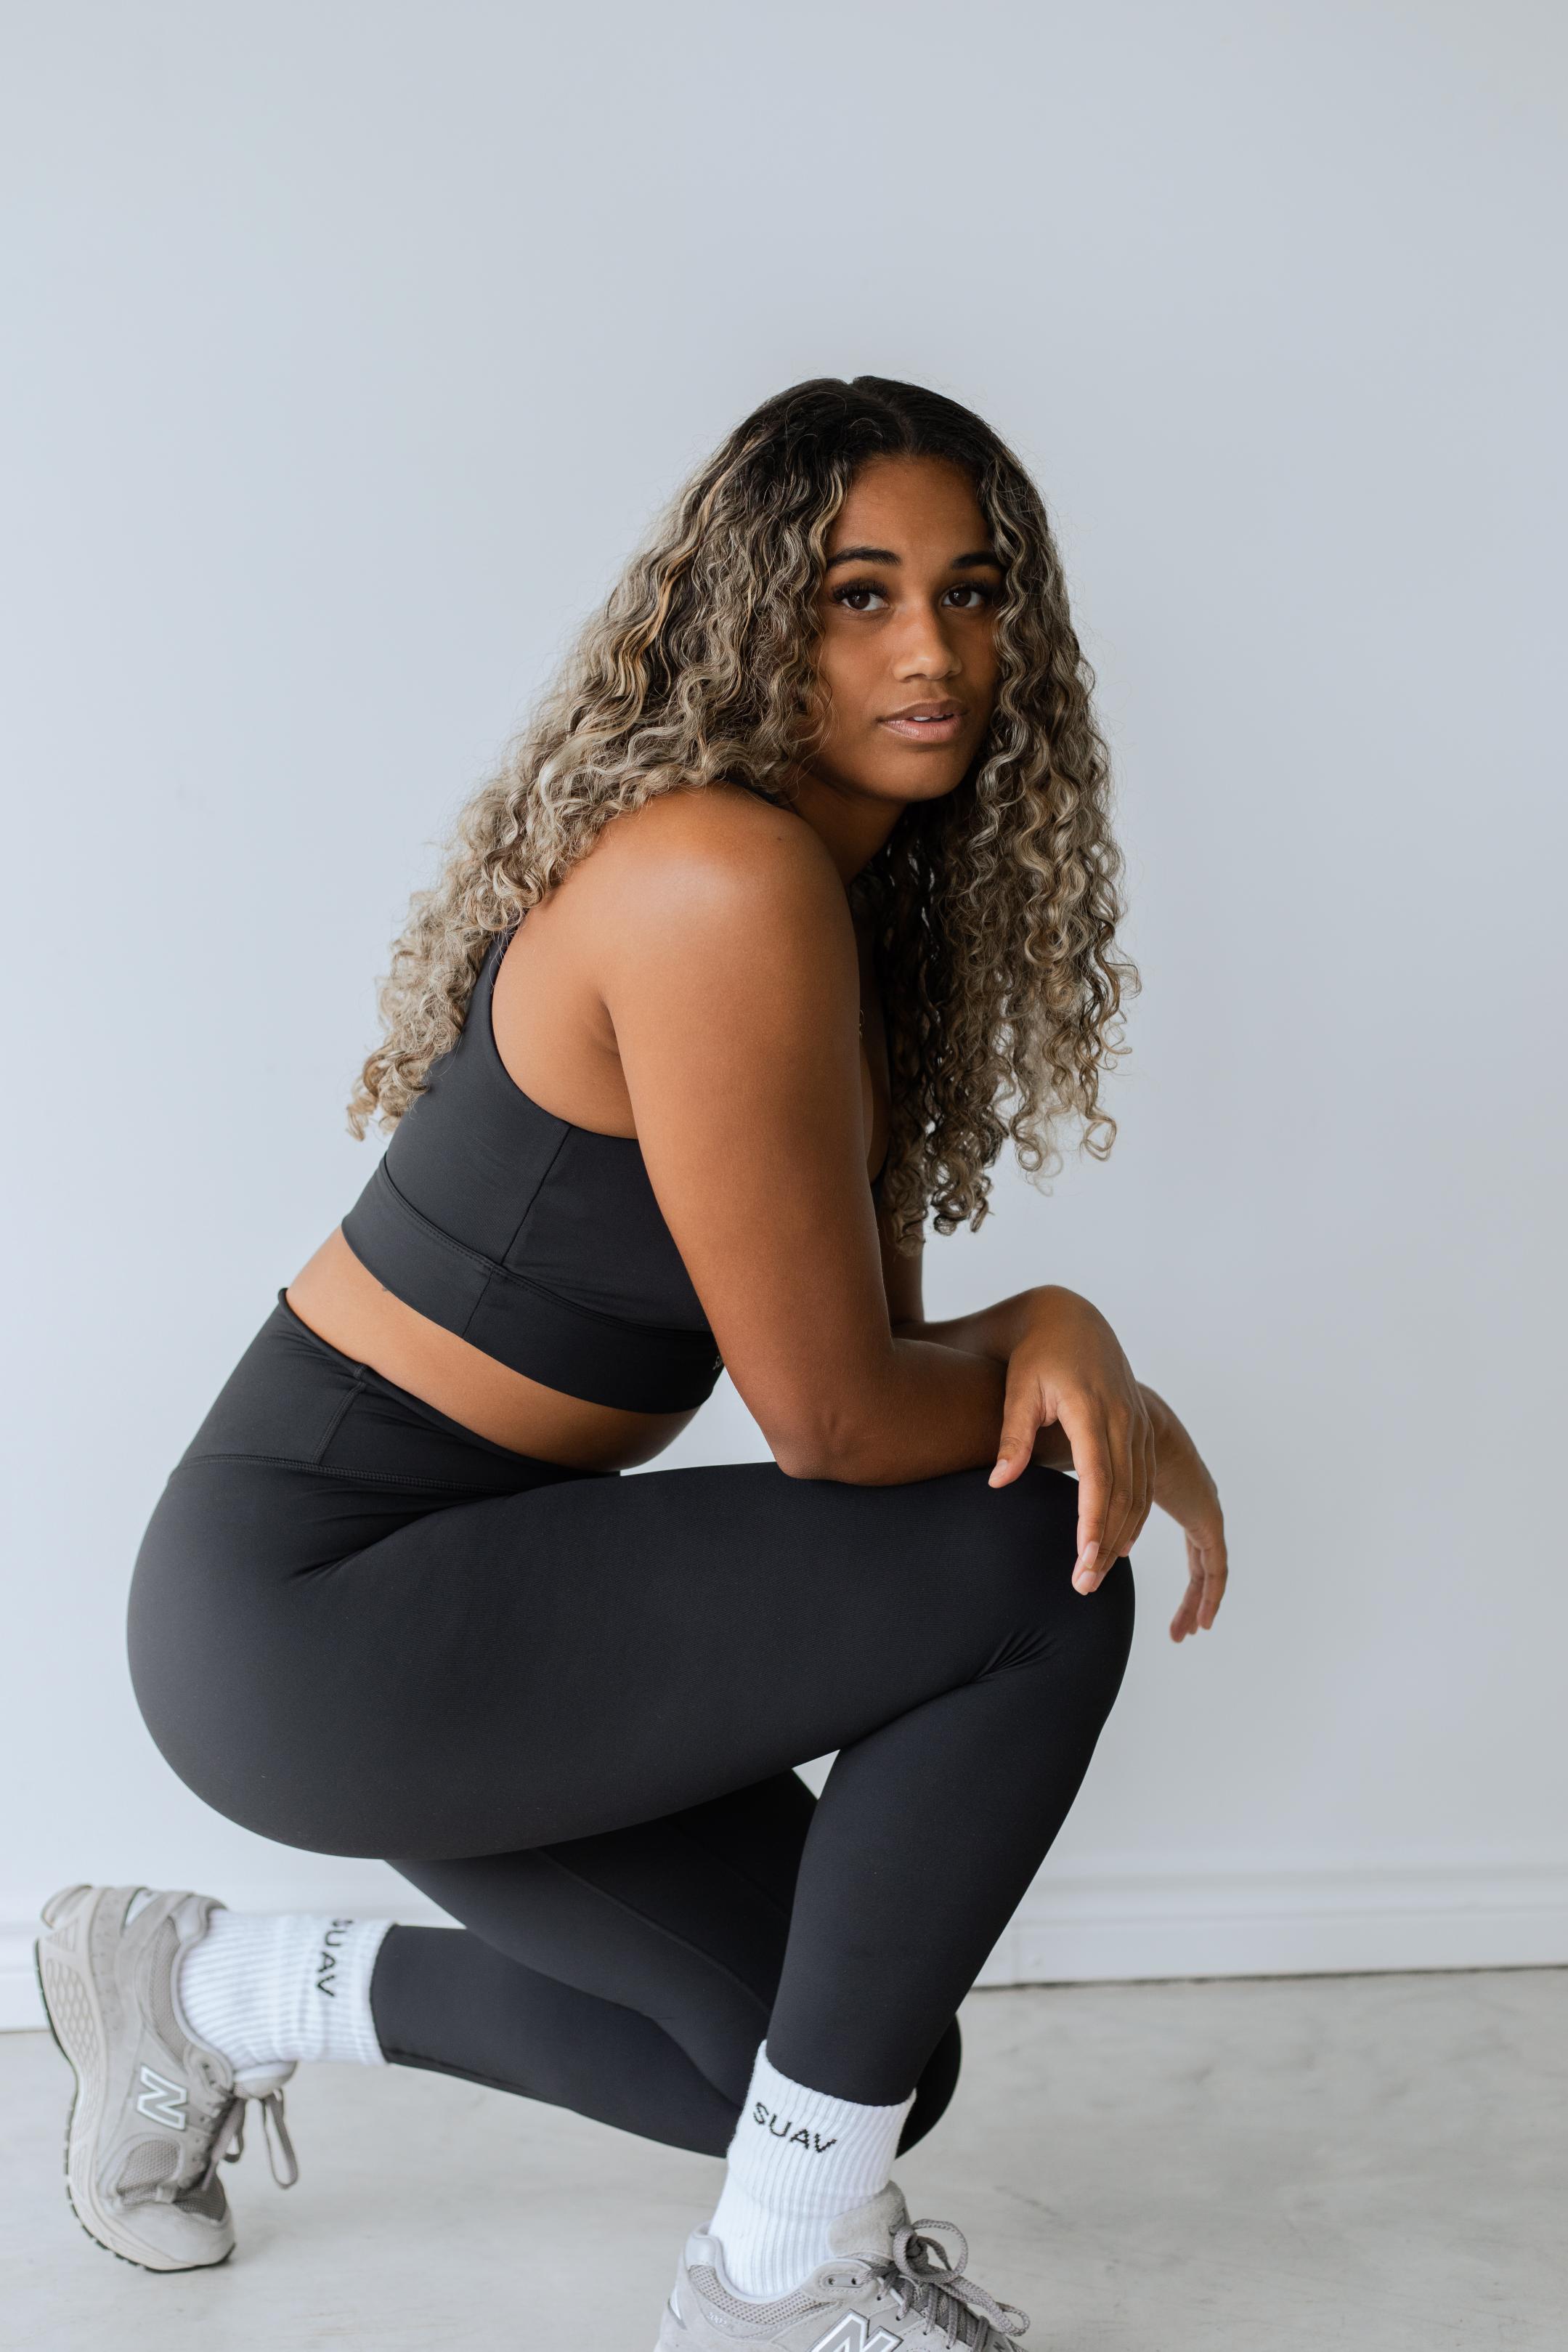 All-in-1 Leggings  High Waisted, Squat Proof Leggings WITH